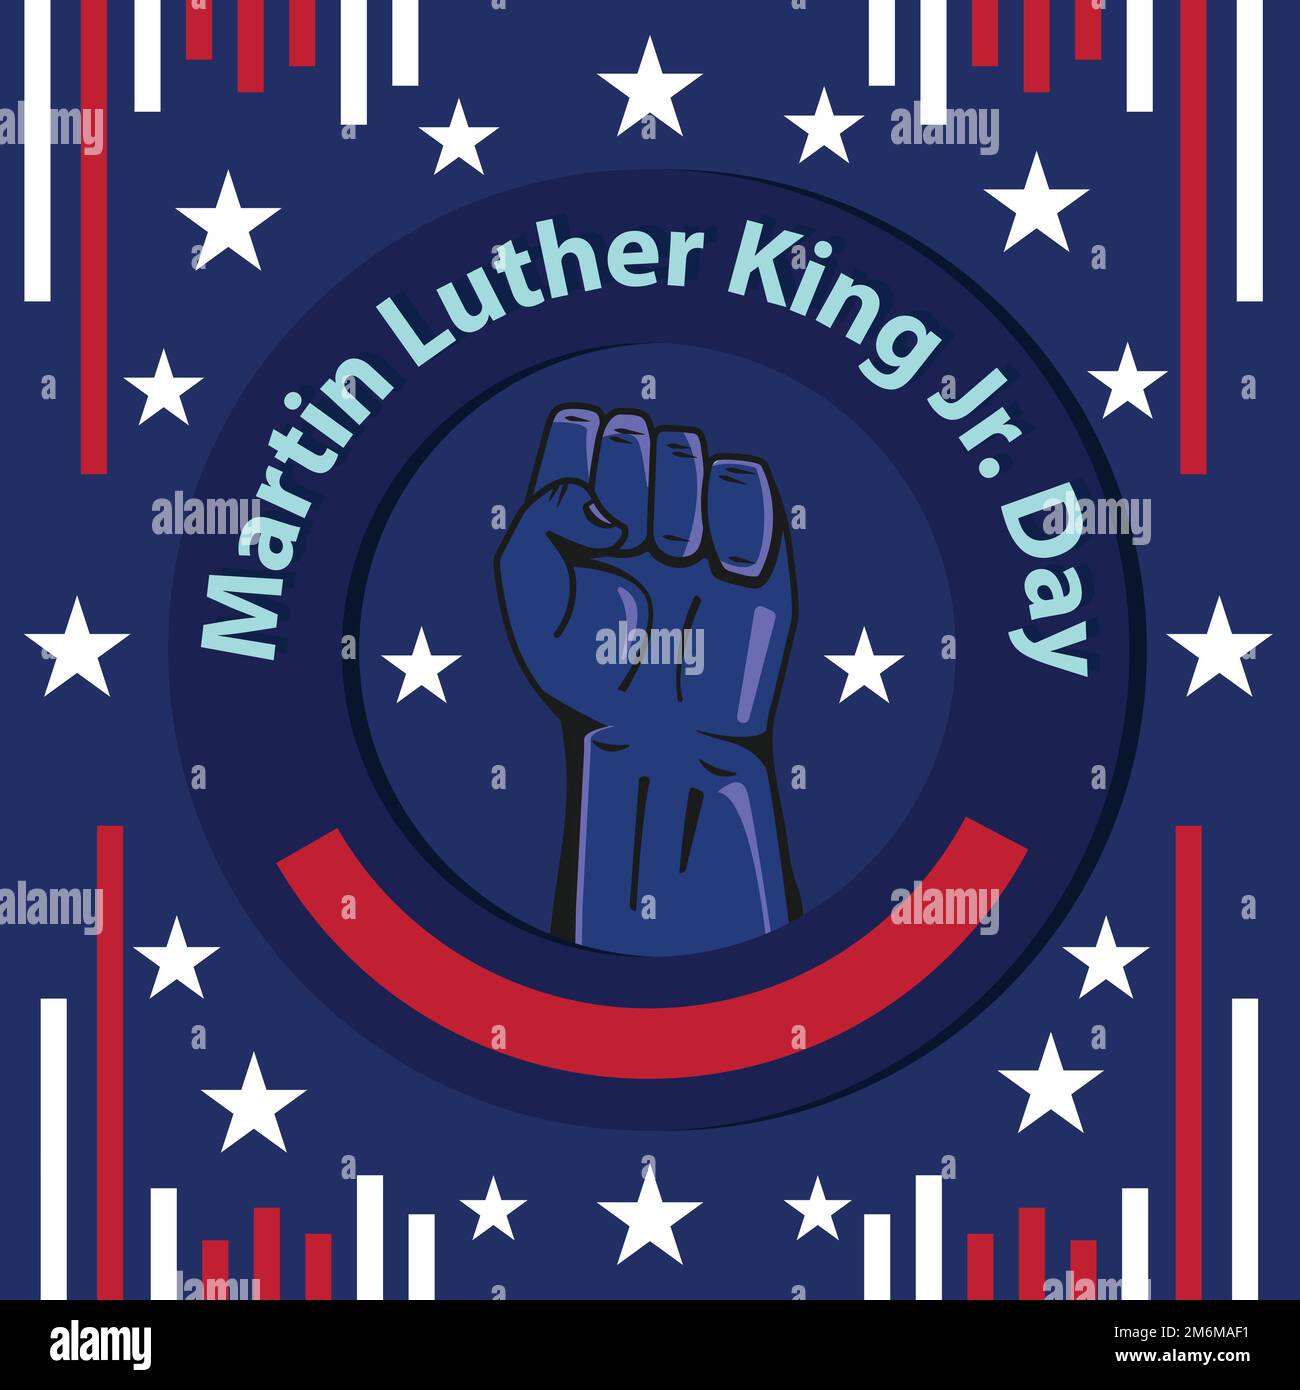 Vector banner design celebrating Martin Luther King Jr day in January every year . Banner designs consist of American flag theme styles. Stock Vector